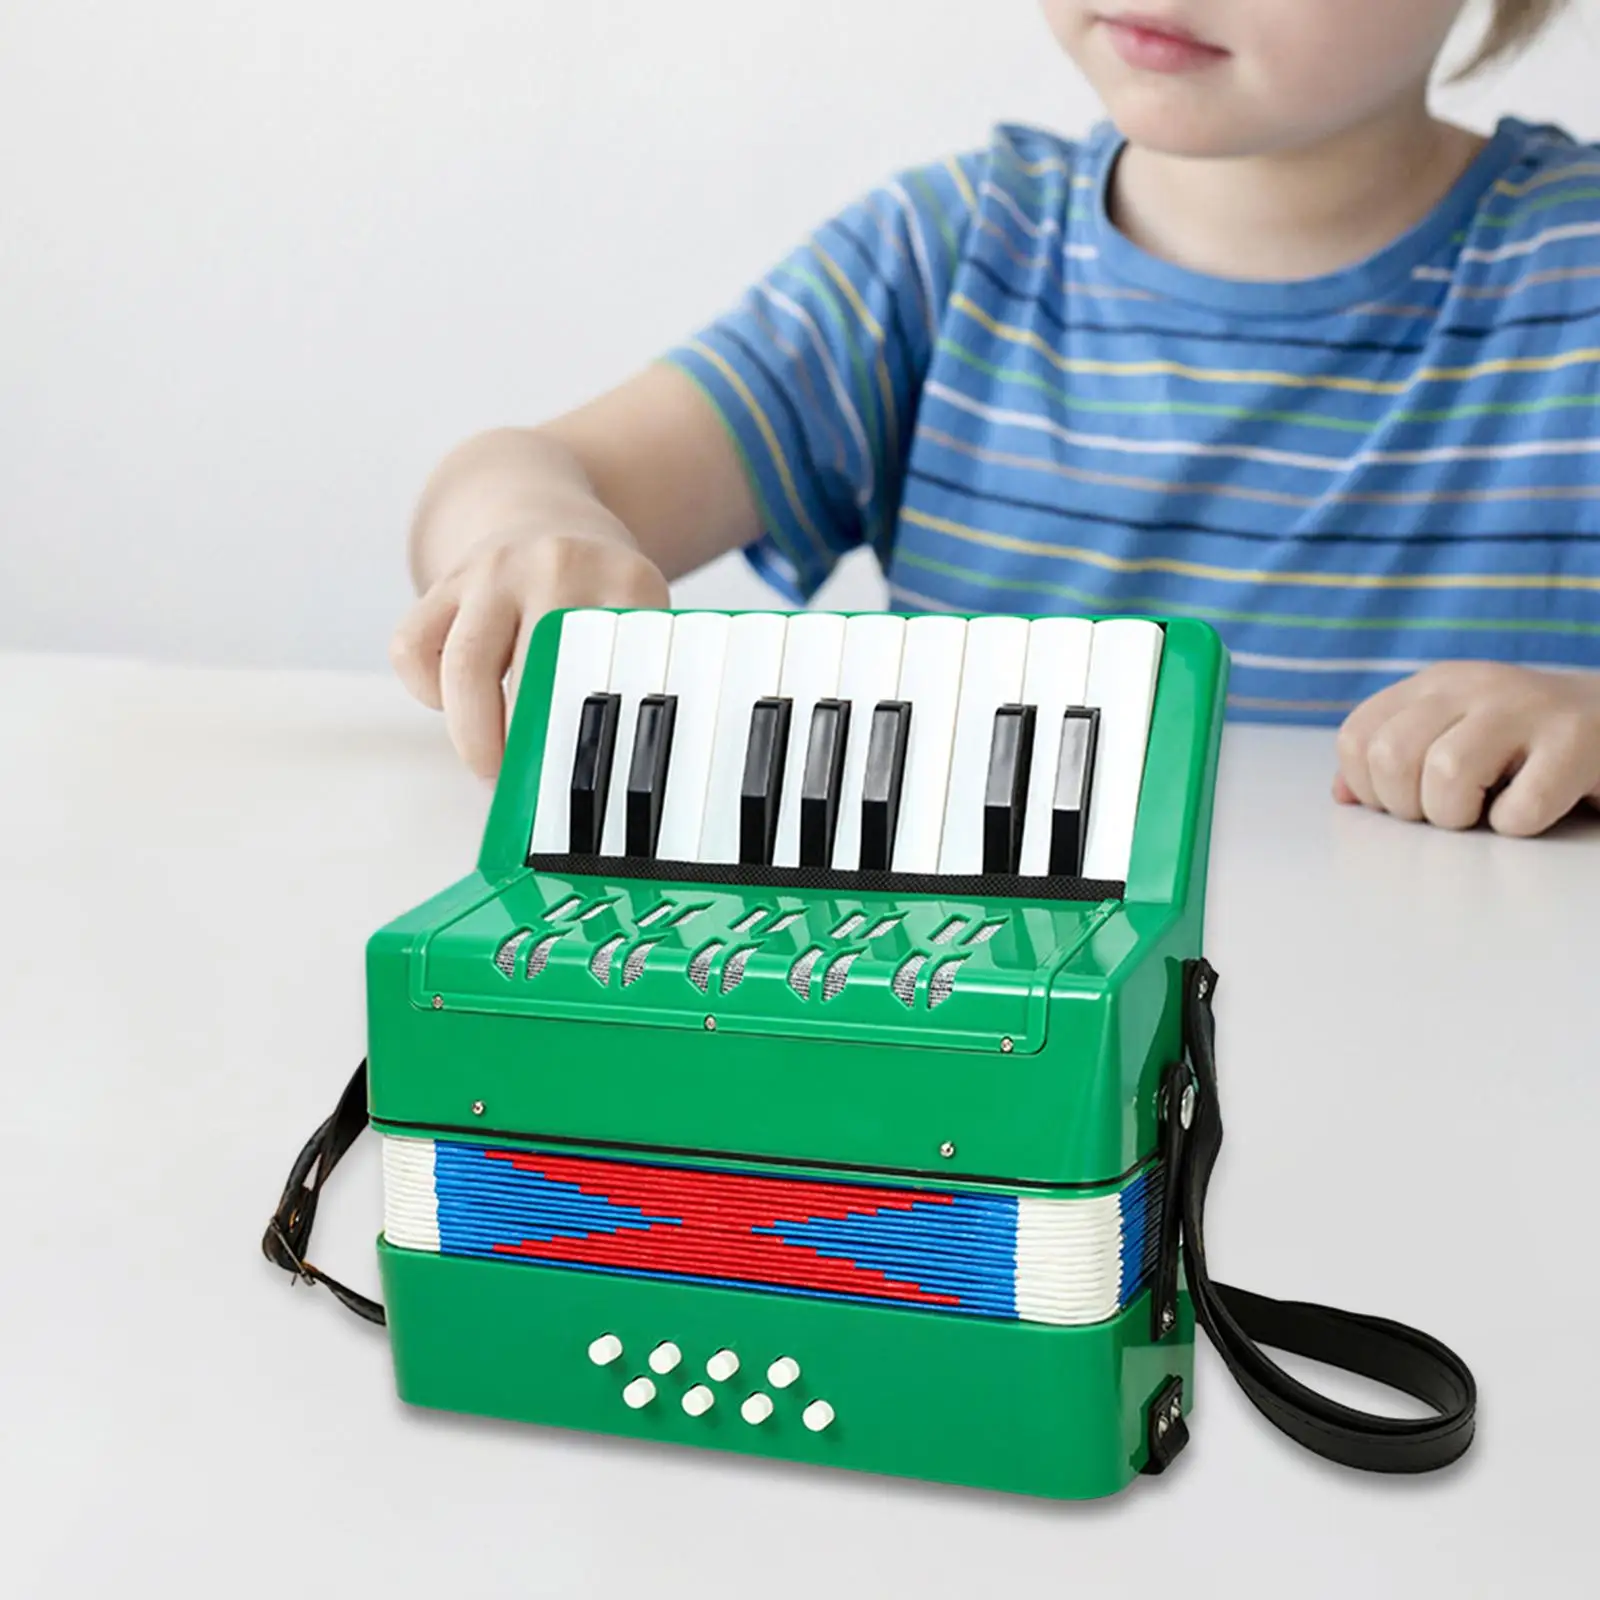 17 Keys 8 Bass Piano Accordion Hand Eye Coordination Educational Musical Toys for Boys Girls Amateur Music Lovers Beginner